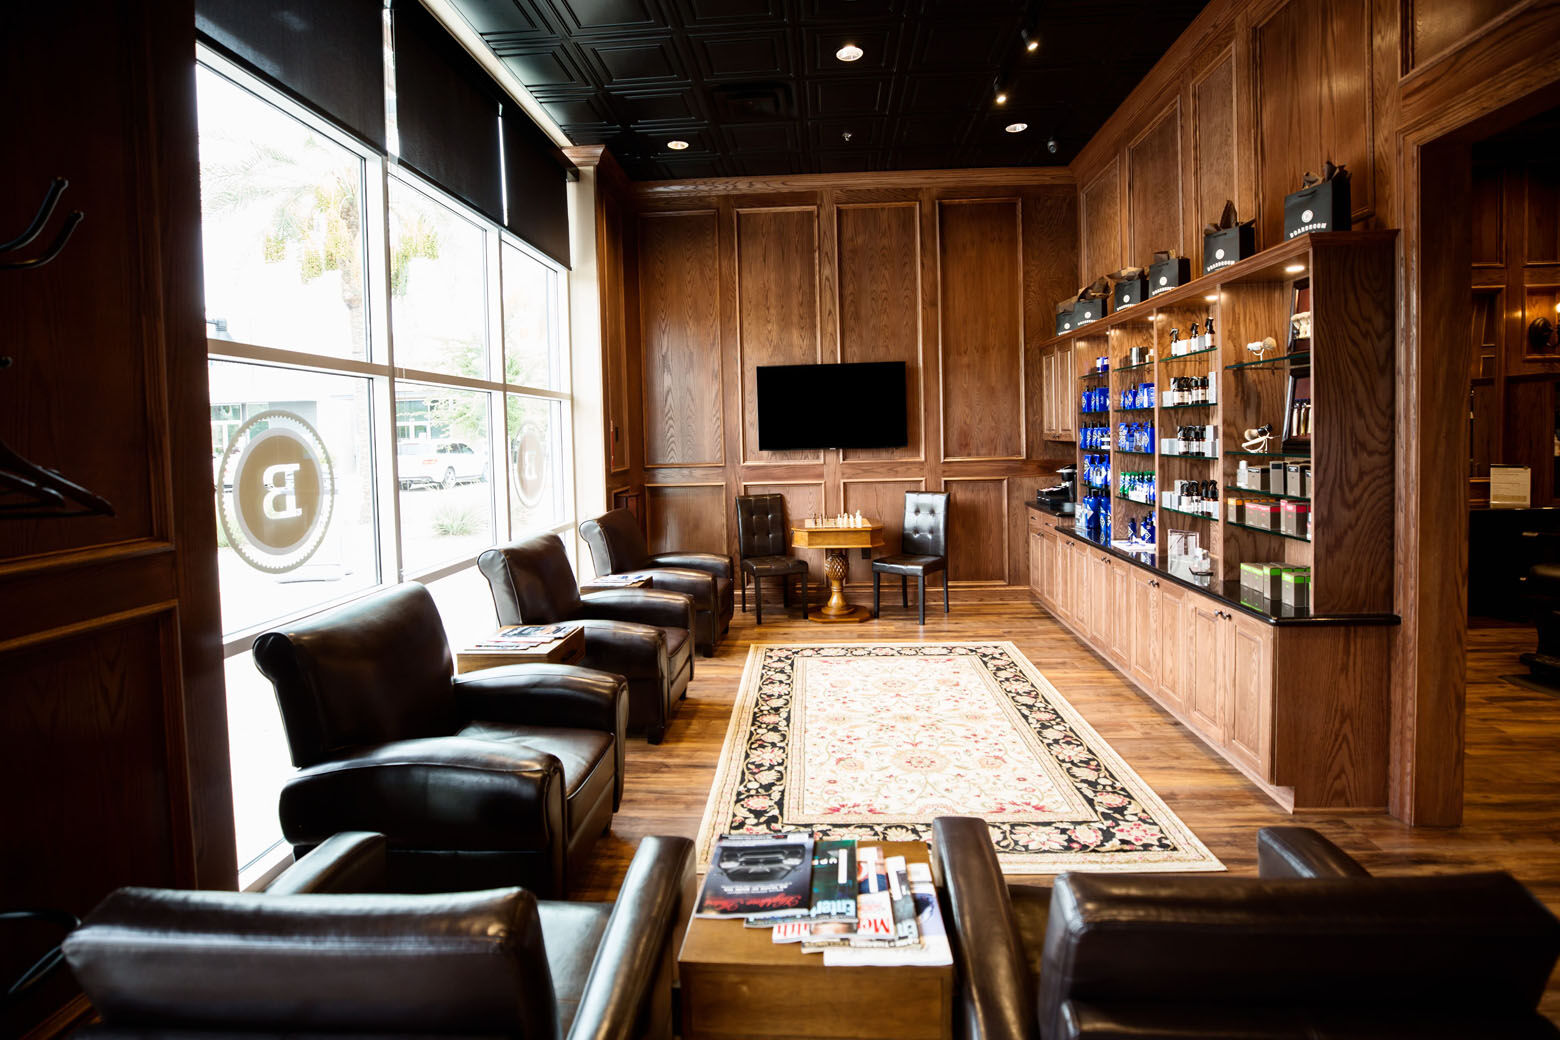 Boardroom Salons, as much leather-chaired lounges as barbershops, provides what it calls a "country club experience." Services offered include hair and shave services, manicures, and facial massages, along with complimentary drinks